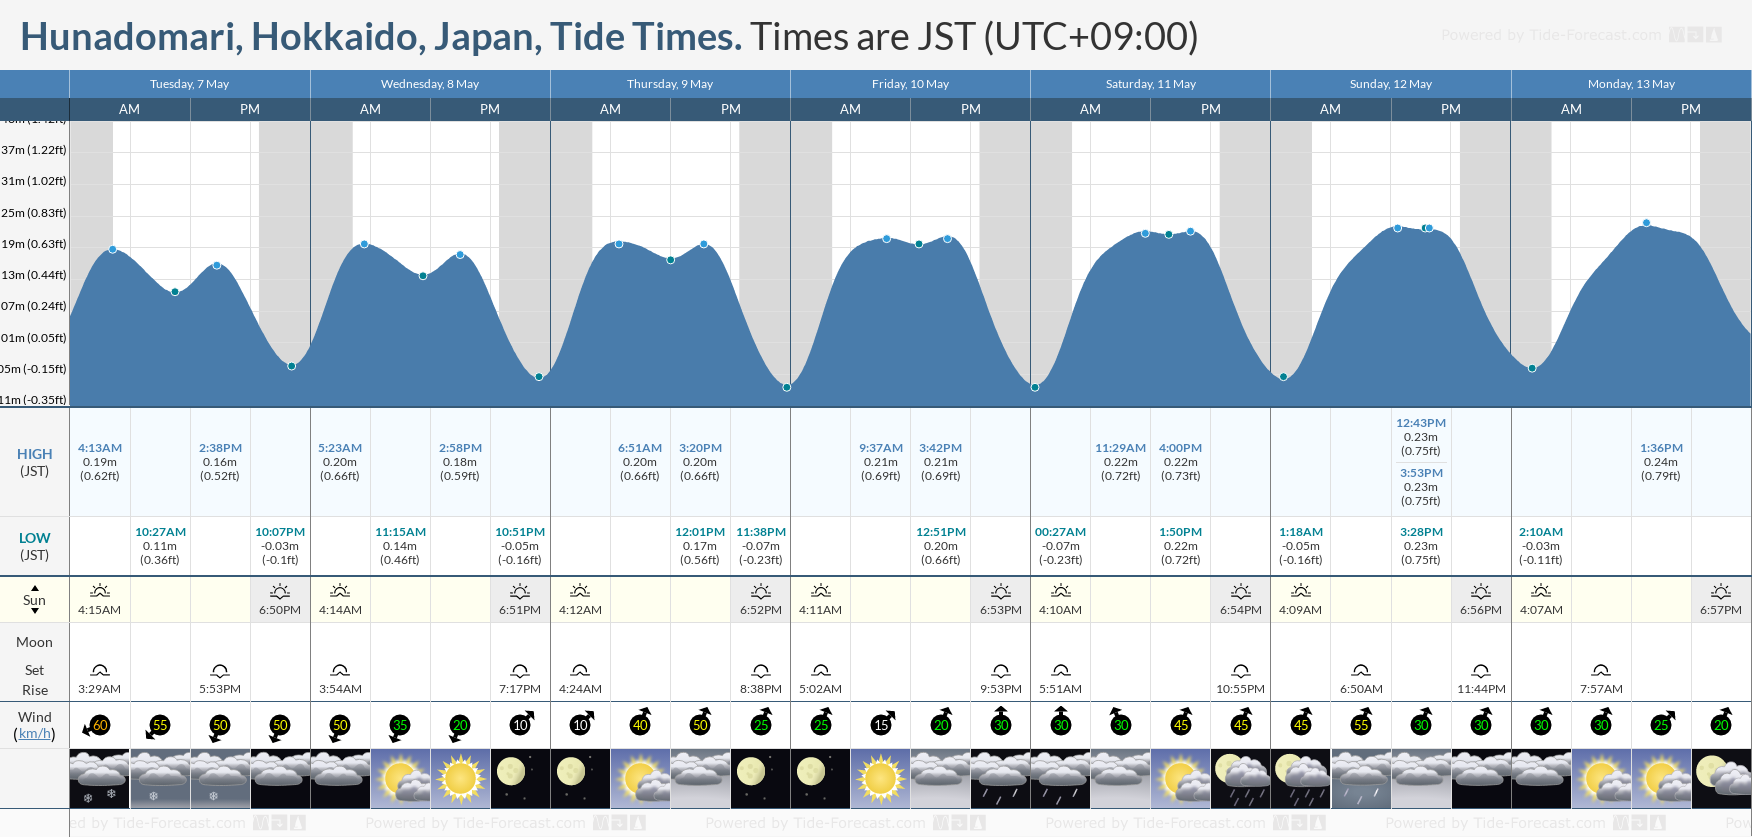 Hunadomari, Hokkaido, Japan Tide Chart including high and low tide tide times for the next 7 days